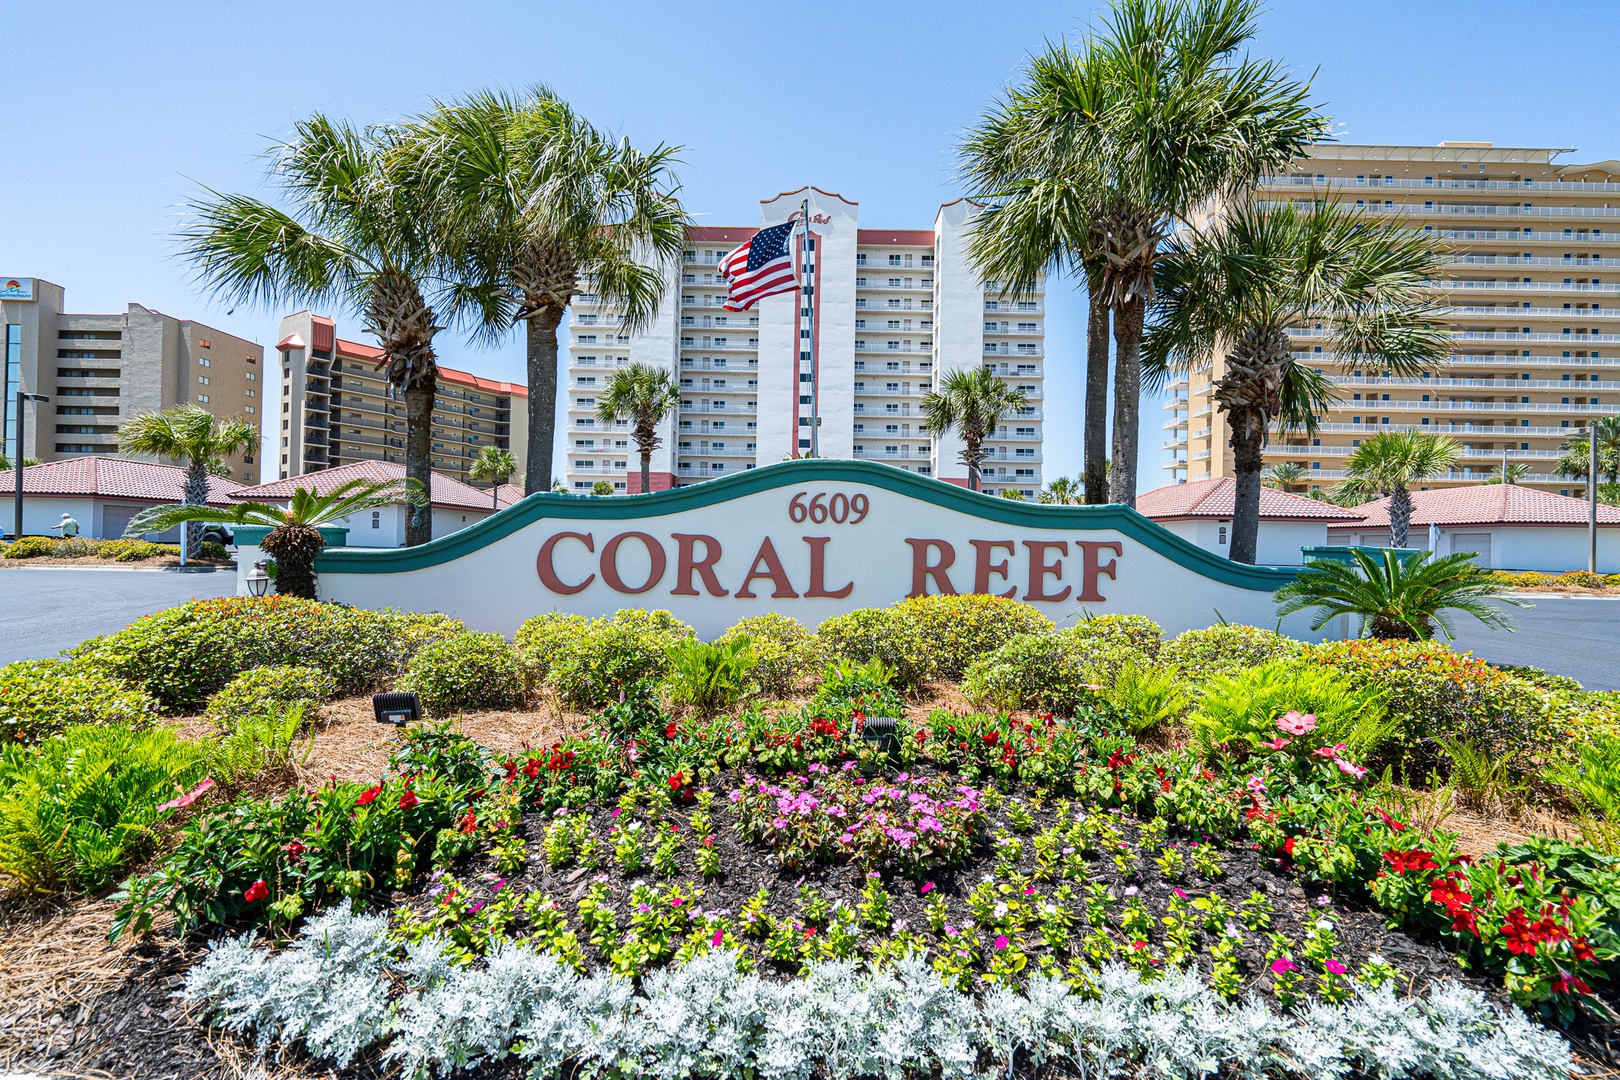 Enjoy your stay at the Coral Reef resort community!